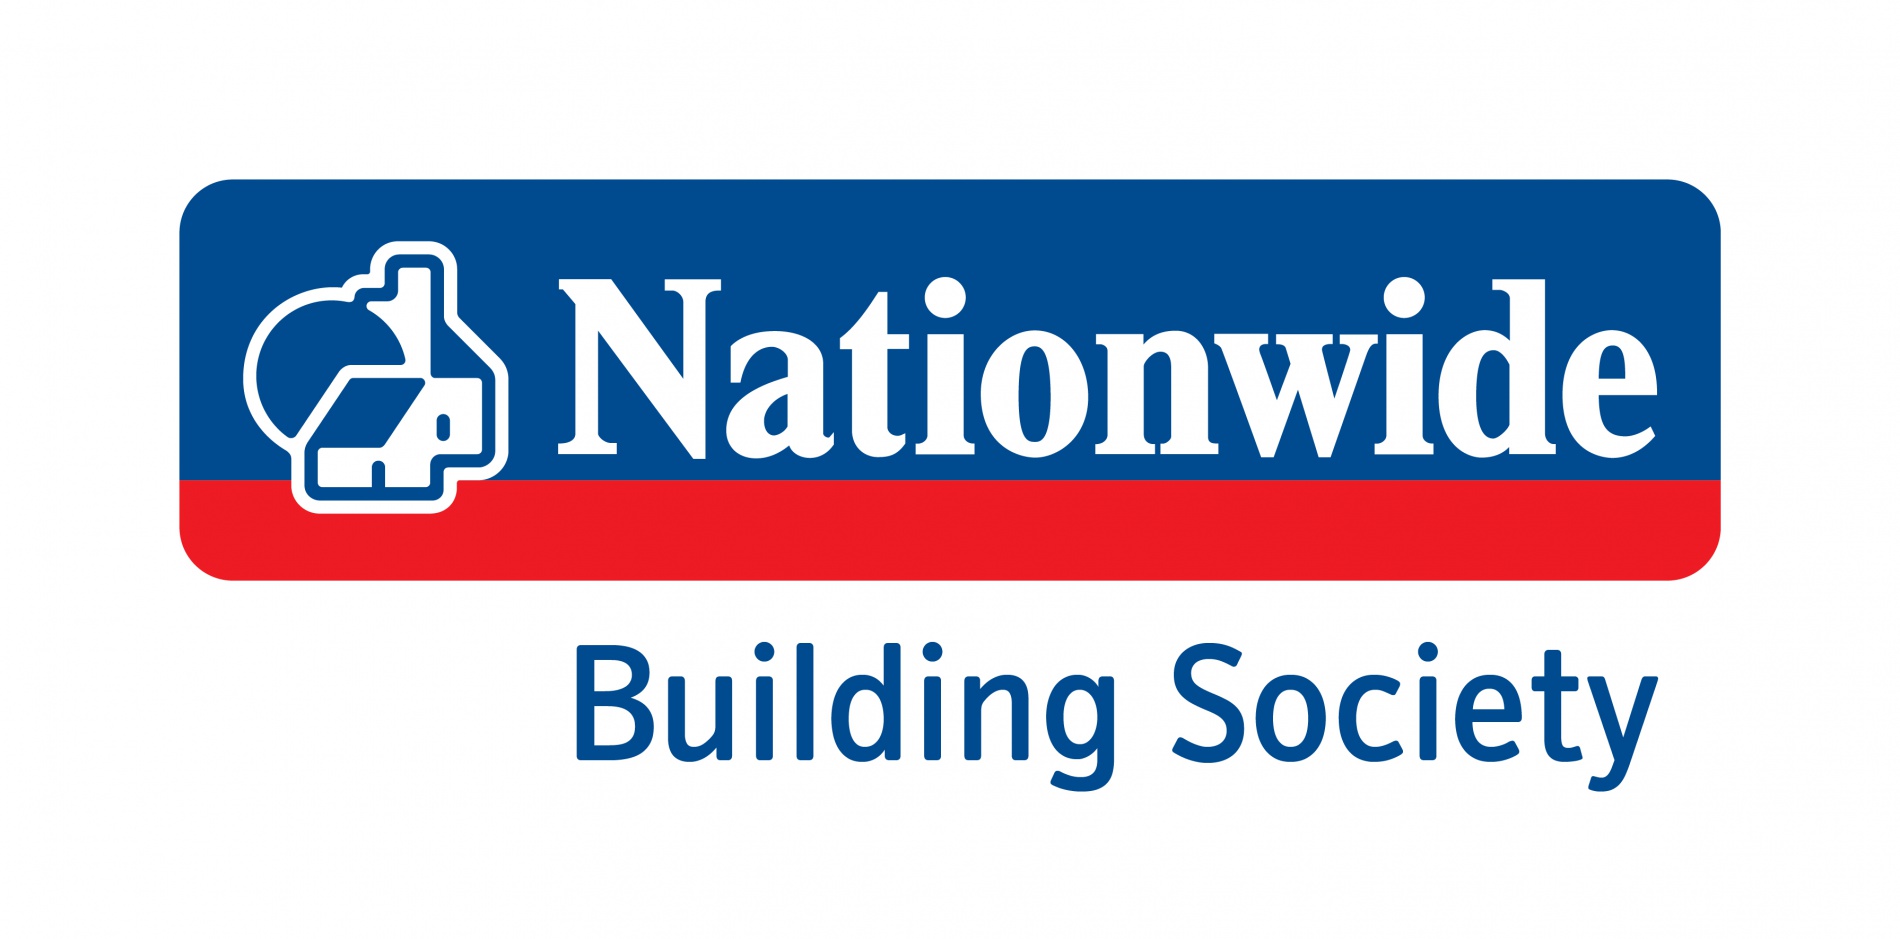 5 Nationwide Building Society